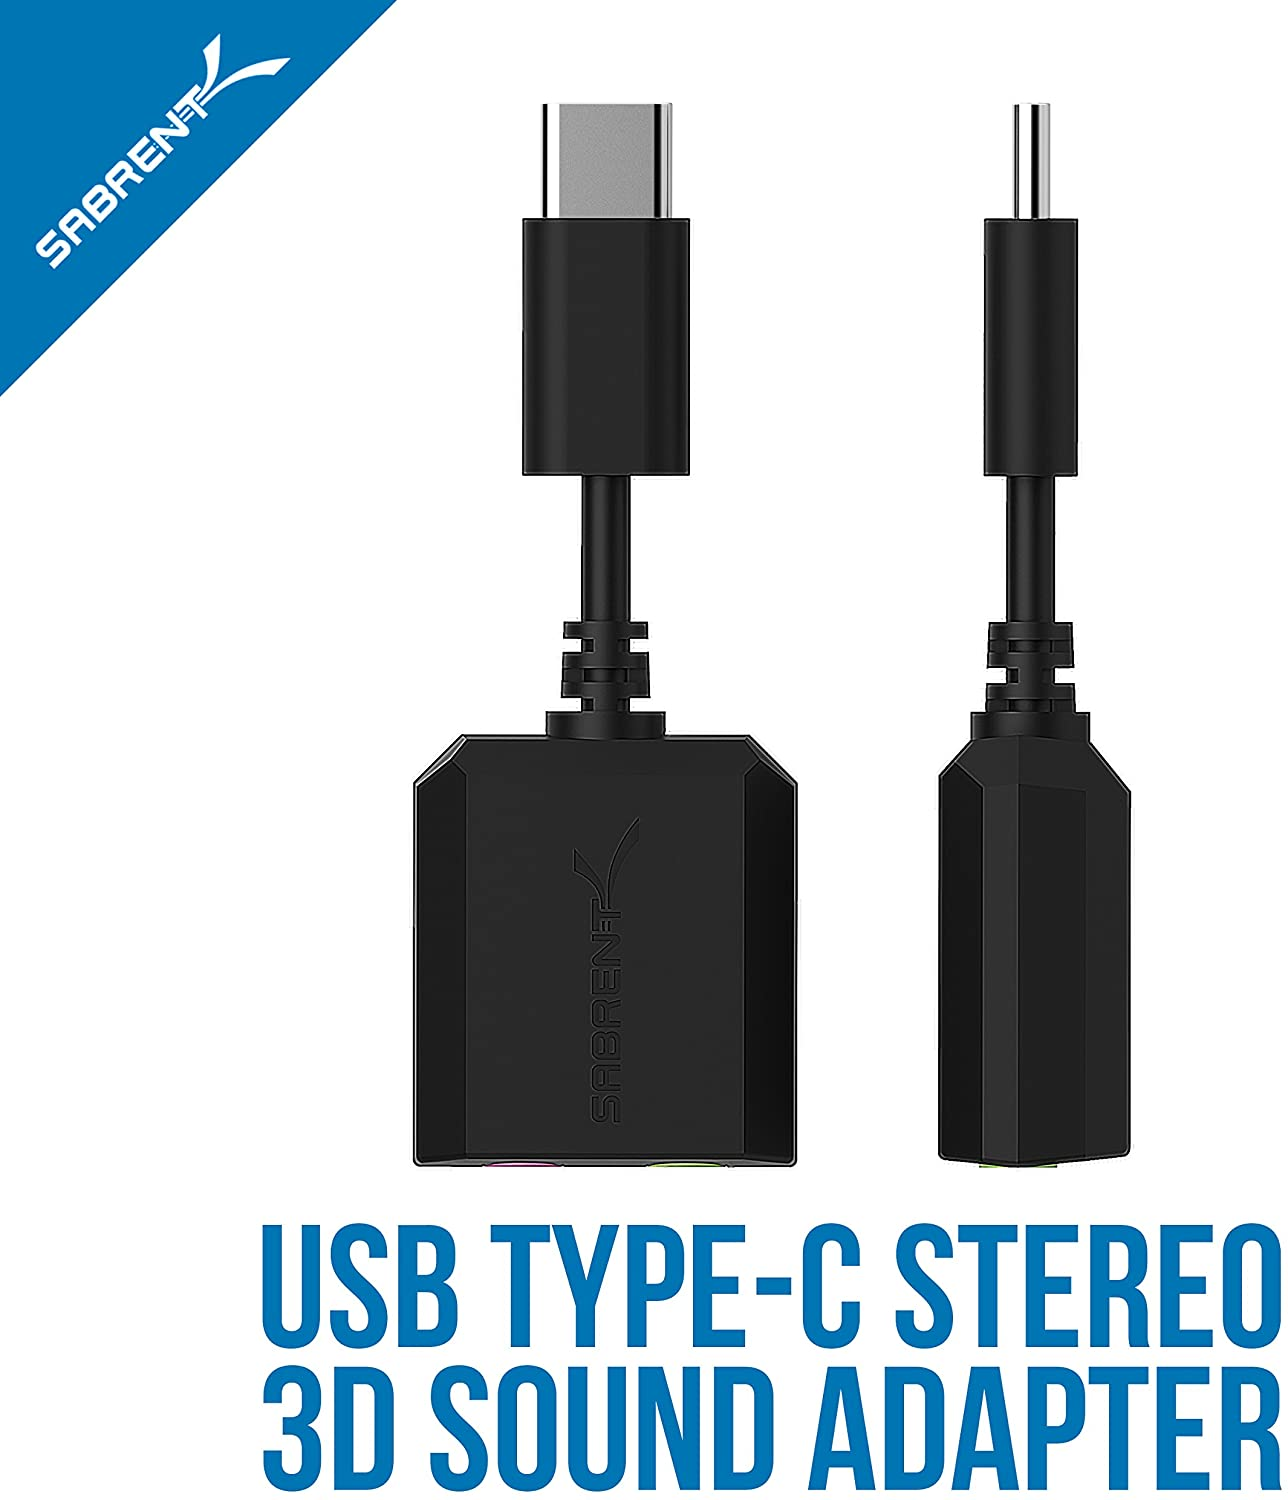 SABRENT USB Type C External Stereo Sound Adapter for Windows and Mac. Plug and Play No Drivers Needed. (AU-MMSC)